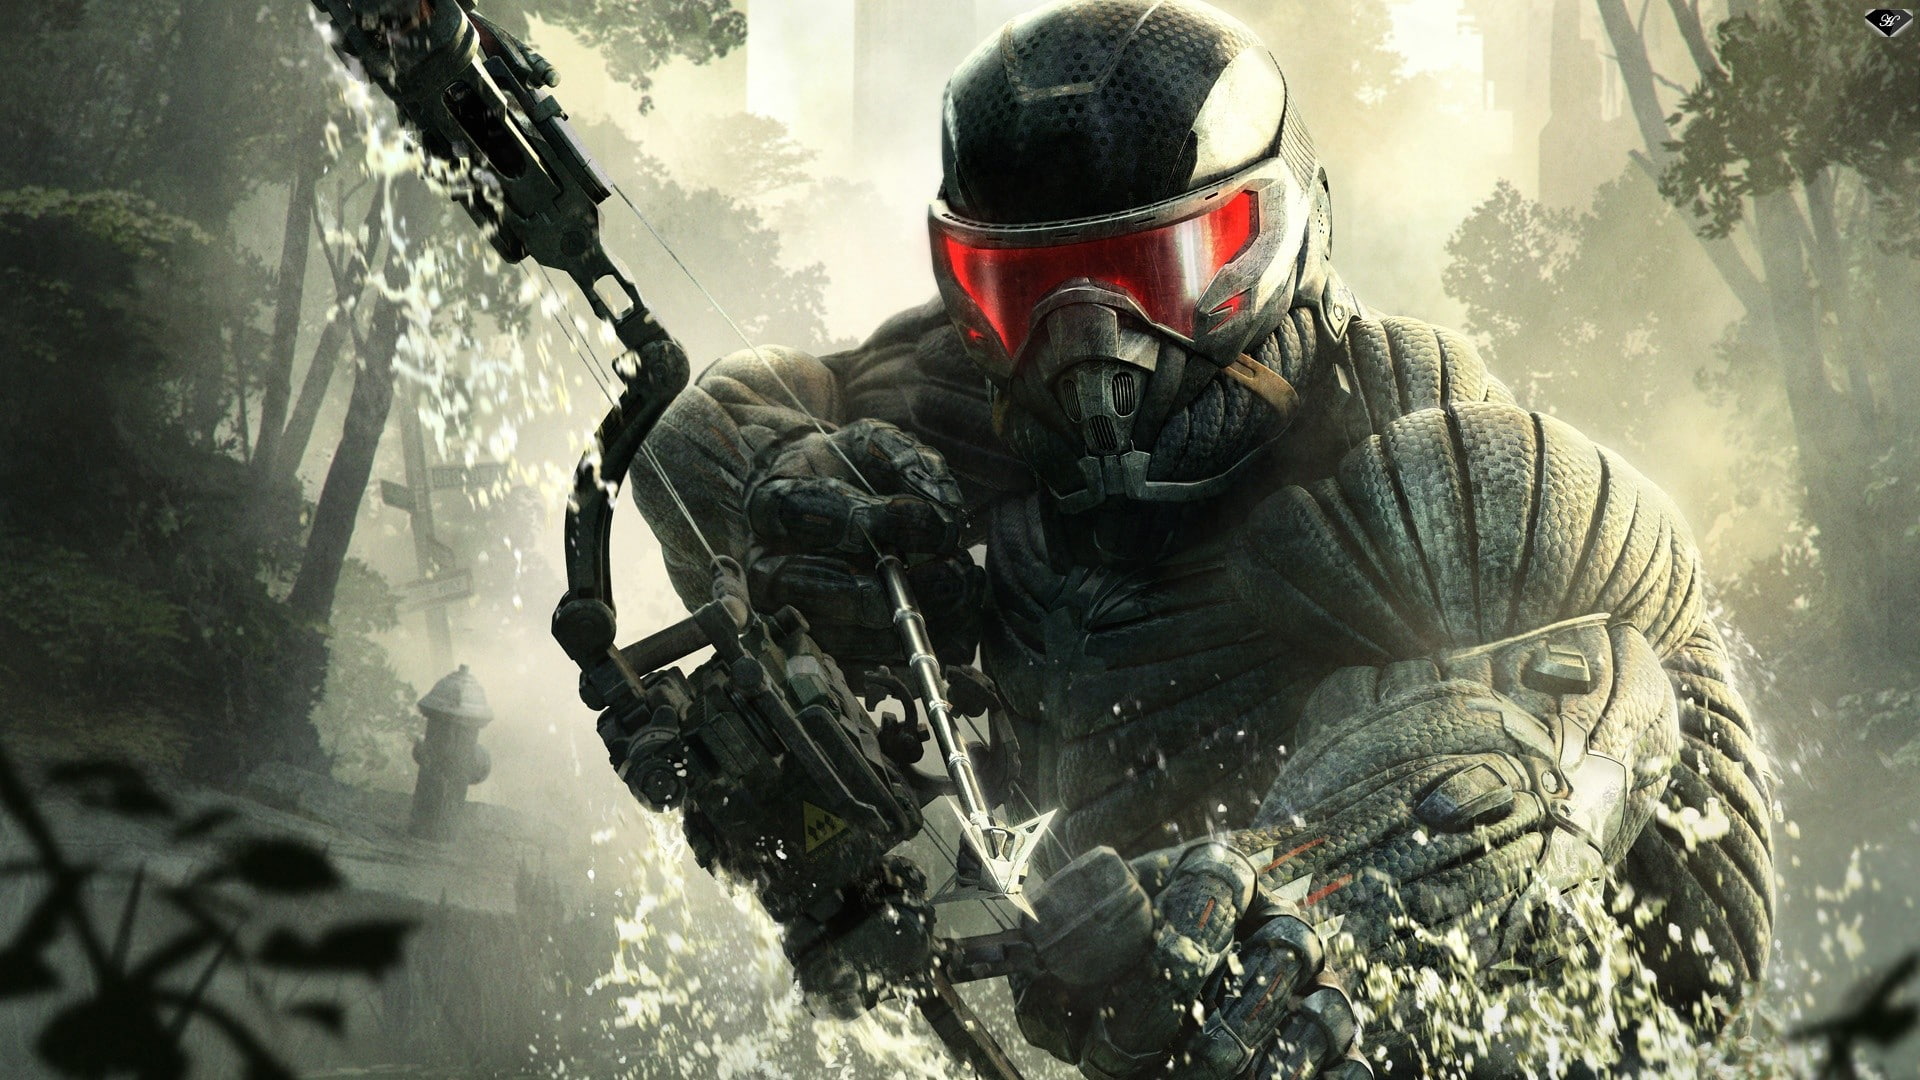 Crysis 3, video games, first-person shooter, bow and arrow